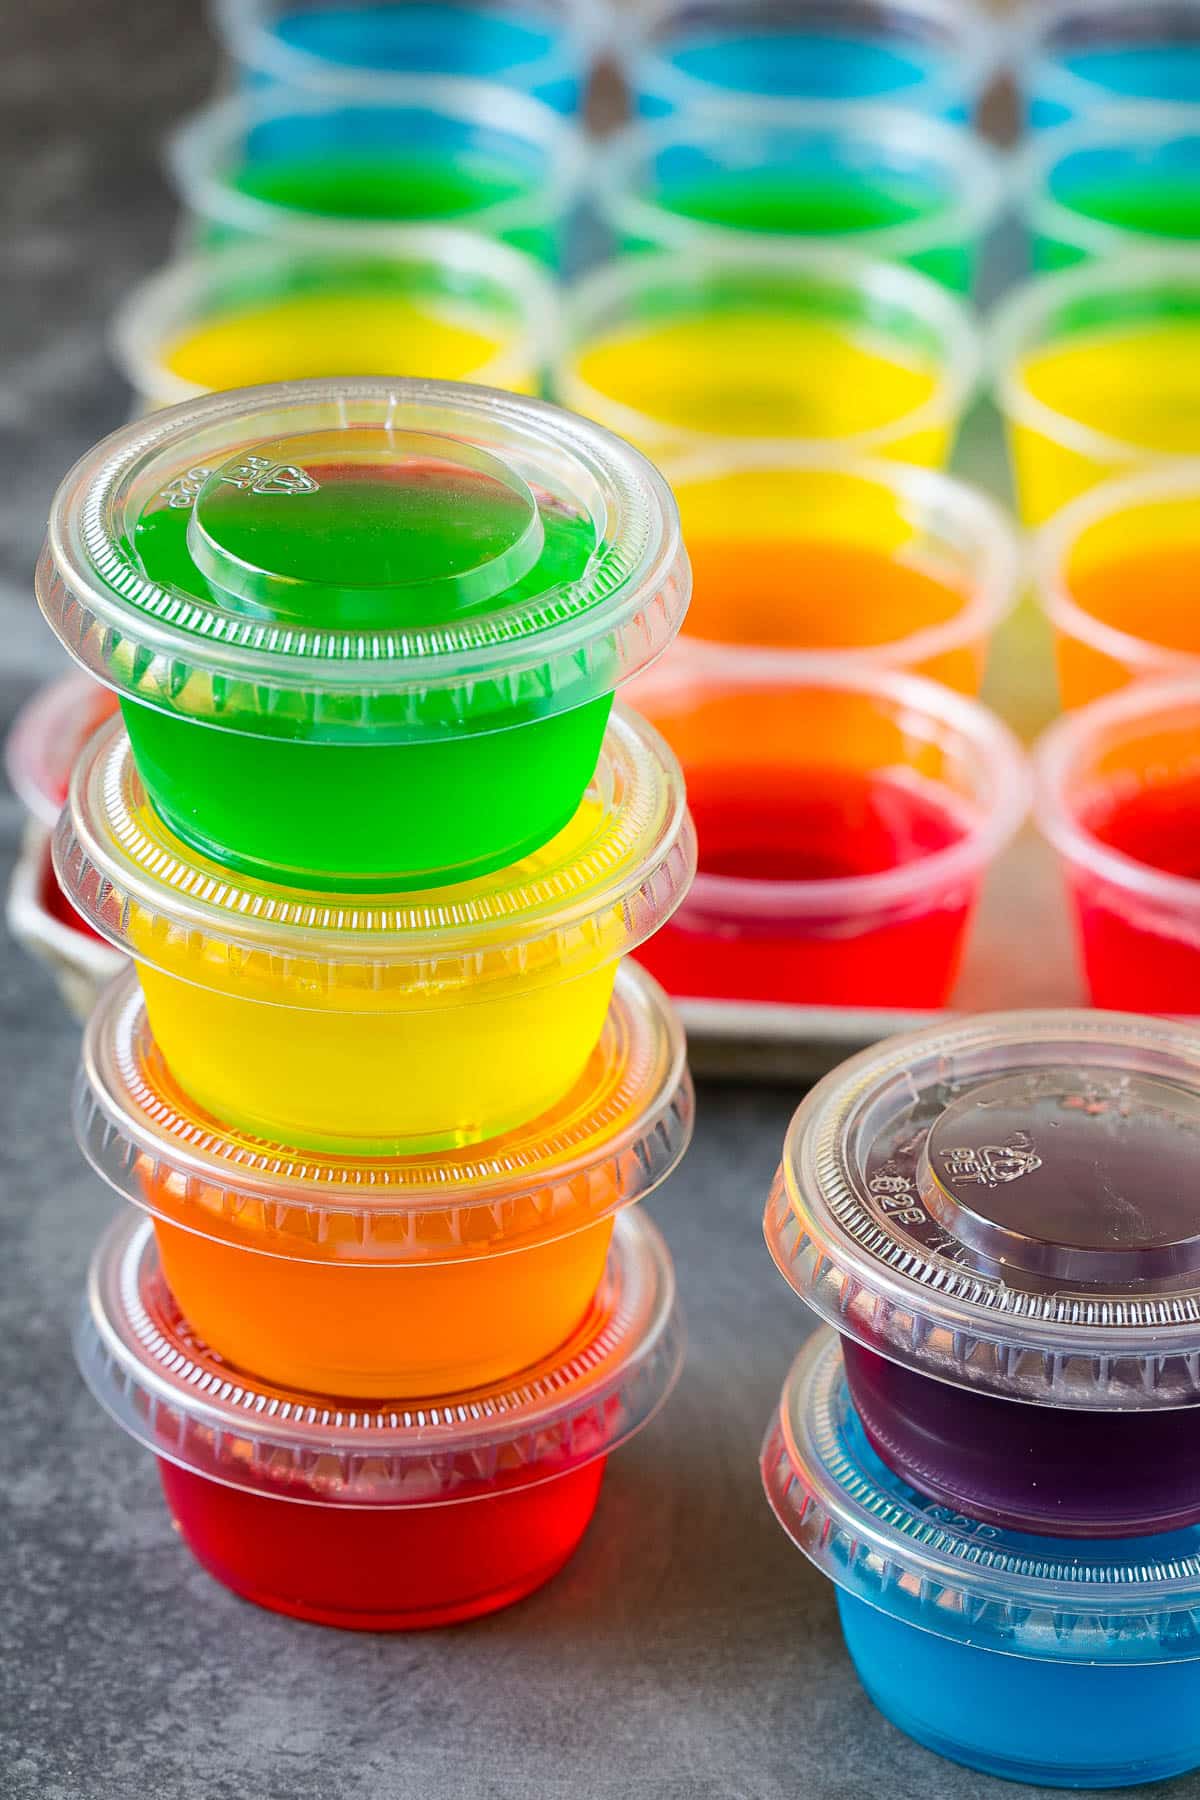 A stack of Jello shots in plastic containers.